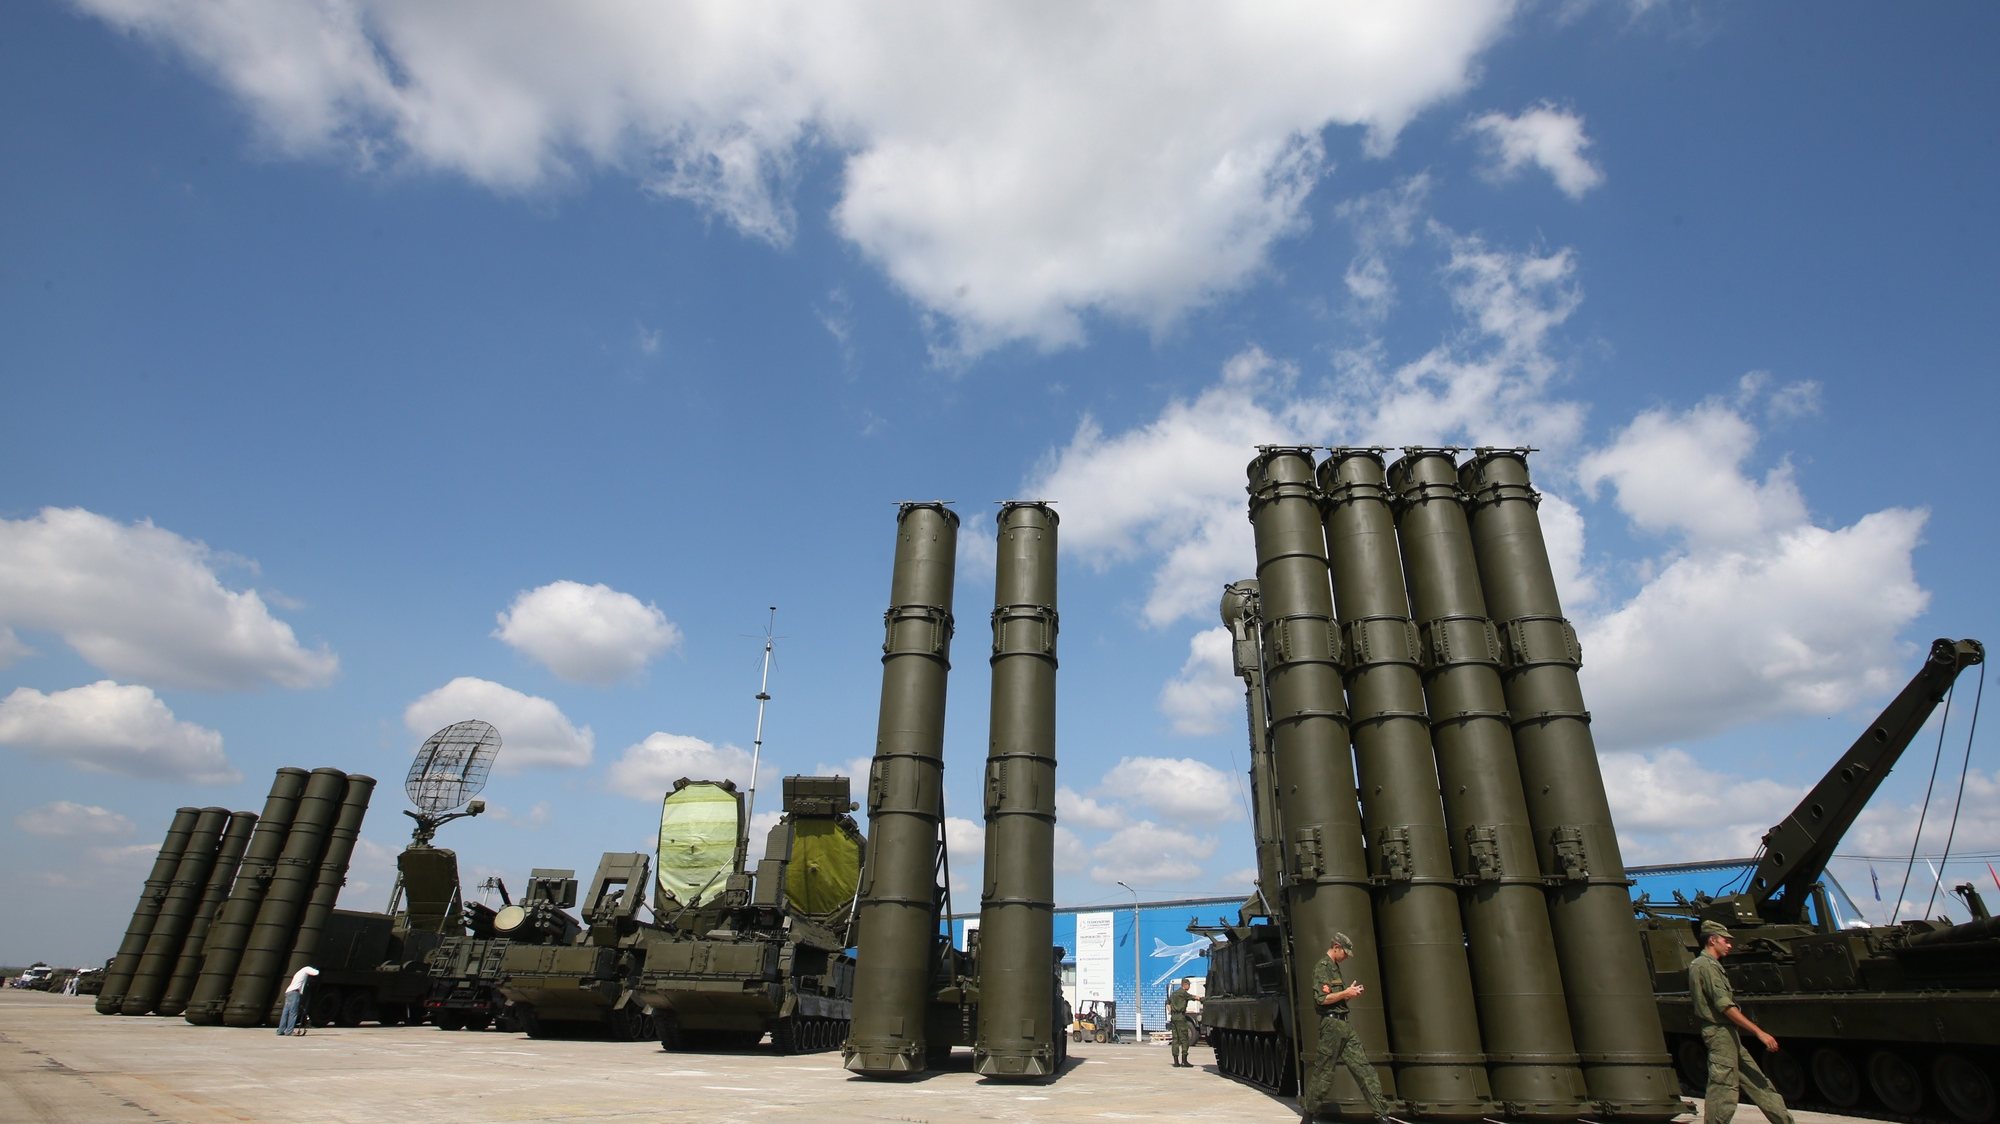 epa07194793 (FILE) - Russian anti-aicraft missile systemes S-300 (R) and S-400 (L) are on display at a military industrial exhibition &#039;Technologies in machine building&#039; in the city of Zhukovsky, Moscow region, Russia, 11 August 2014 (reissued 28 November 2018). According to reports, Russia is planning to deploy S-400 missile systems on the Crimean Peninsula in the wake of the latest crisis with Ukraine. Three Ukrainian war ships were seized and their crew arrested by Russian navy for an alleged violation of the Russian sea border in the Kerch Strait connection the Balck Sea and the Sea of Azov.  EPA/SERGEI CHIRIKOV